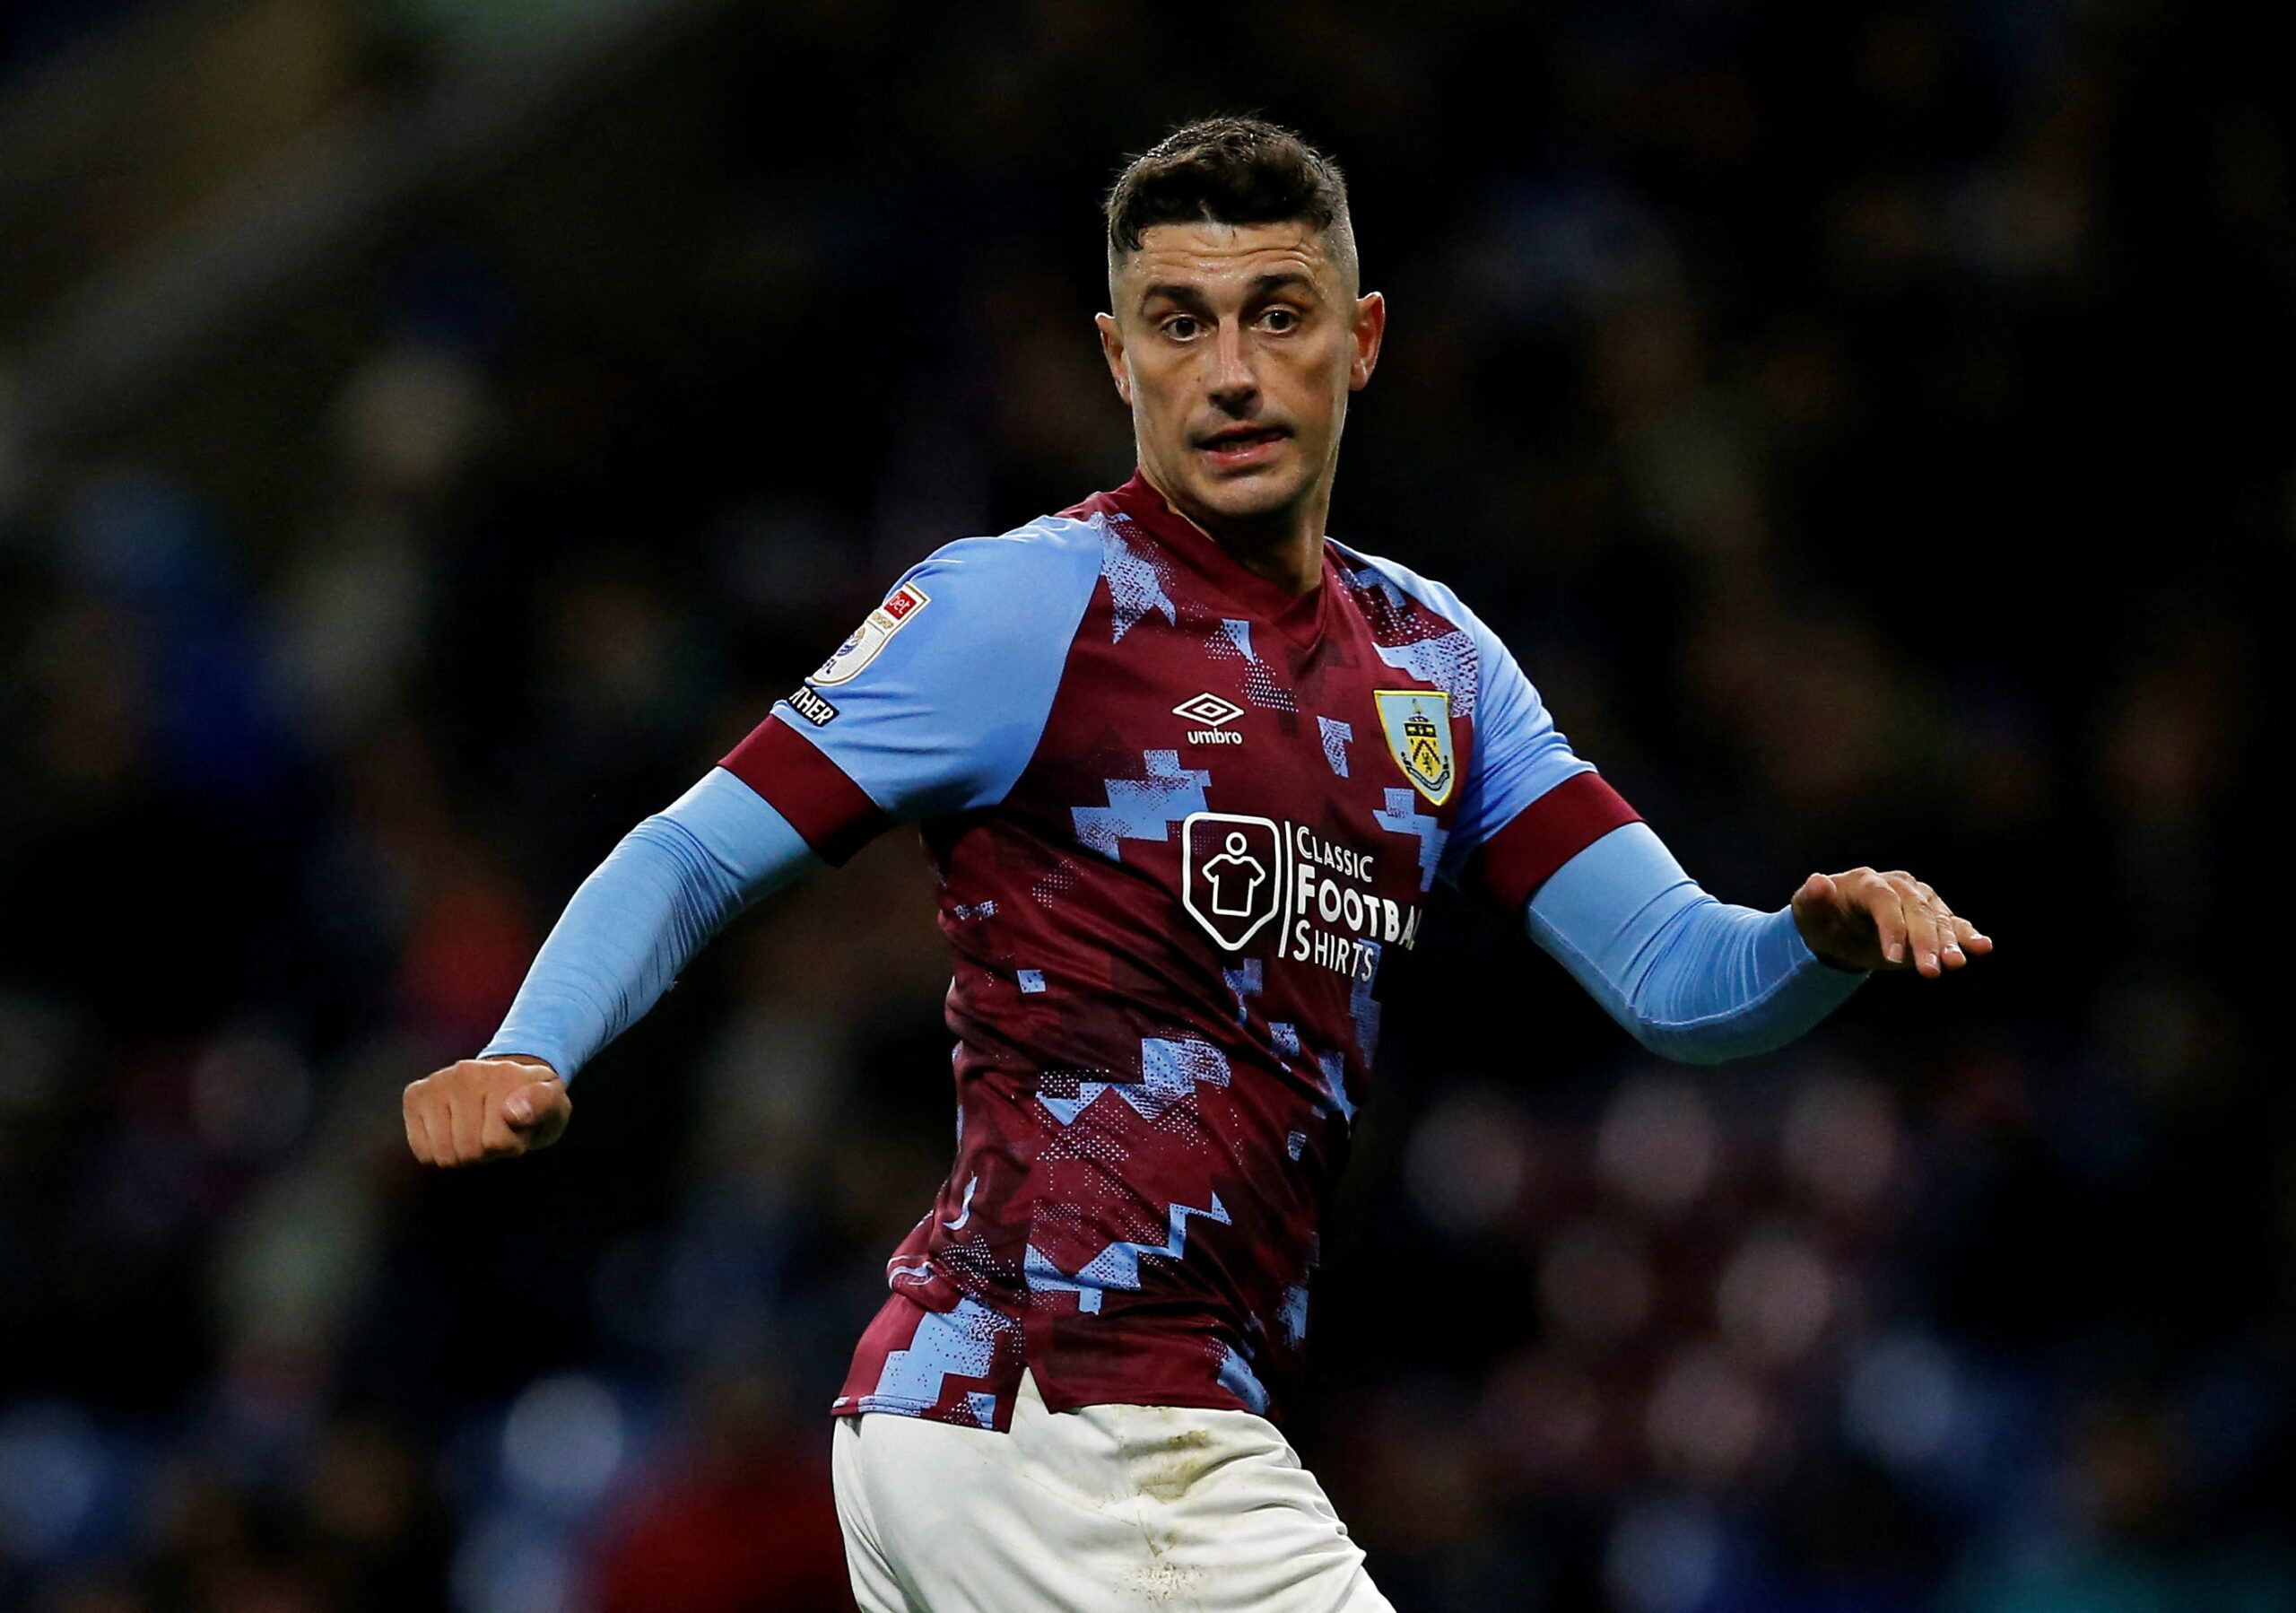 Soccer Football - Carabao Cup Third Round - Burnley v Crawley Town - Turf Moor, Burnley, Britain - November 8, 2022 Burnley's Matthew Lowton  Action Images/Craig Brough  EDITORIAL USE ONLY. No use with unauthorized audio, video, data, fixture lists, club/league logos or 